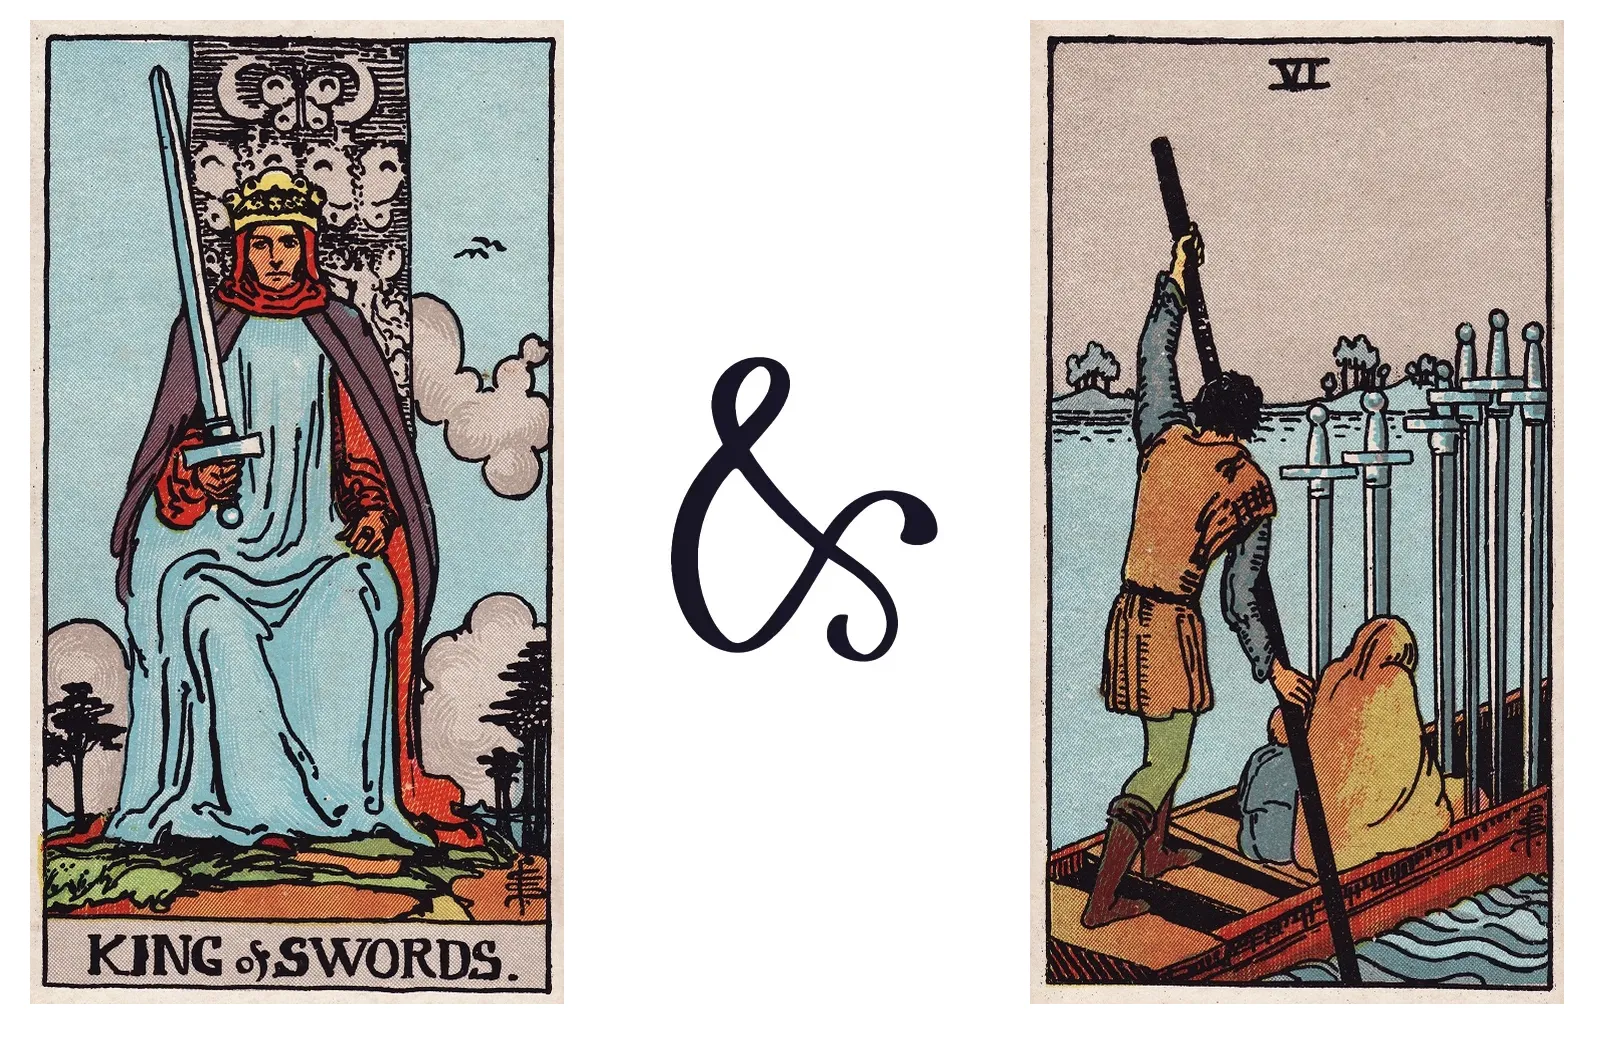 King of Swords and Six of Swords